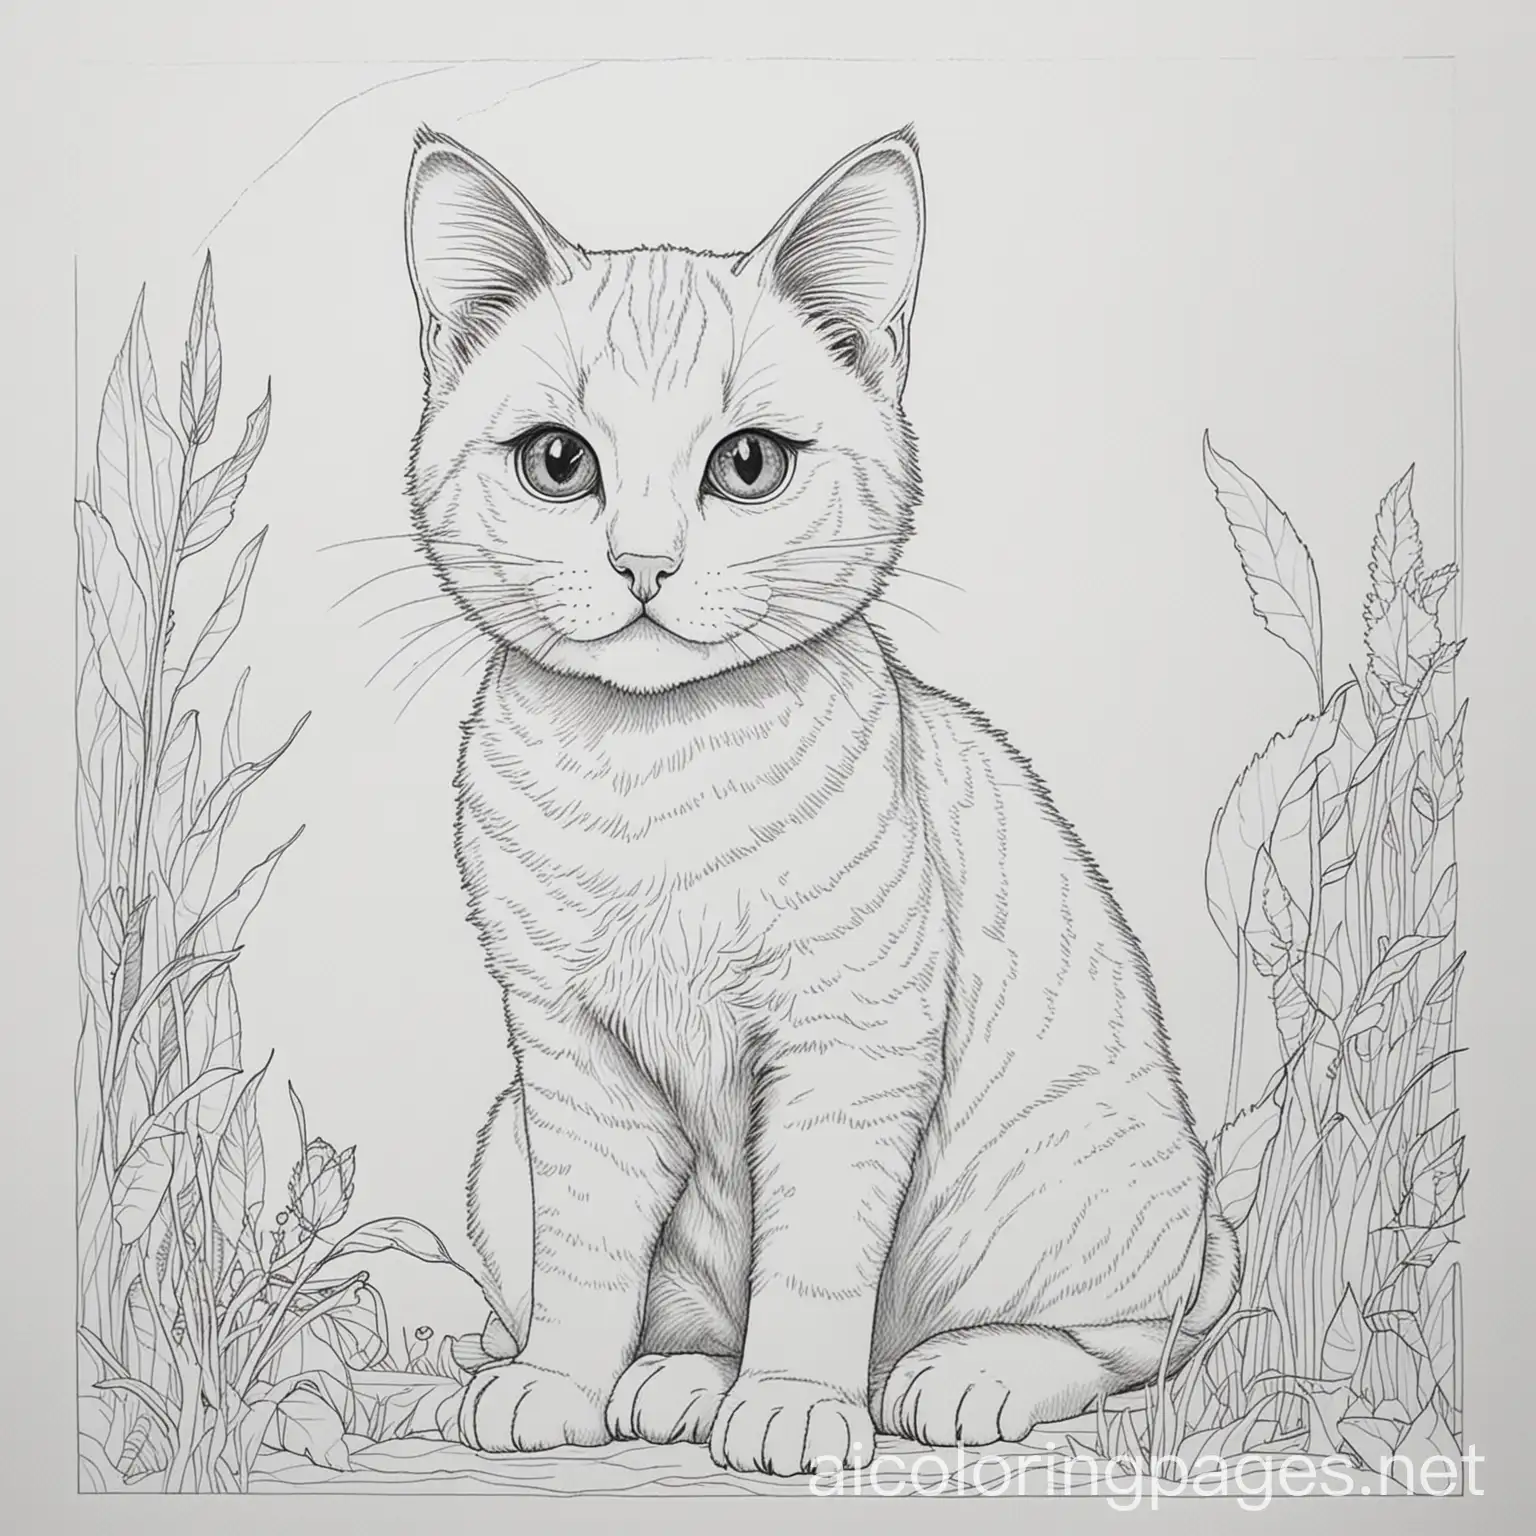 Adult Coloring Pages: Cat, Coloring Page, black and white, line art, white background, Simplicity, Ample White Space. The background of the coloring page is plain white to make it easy for young children to color within the lines. The outlines of all the subjects are easy to distinguish, making it simple for kids to color without too much difficulty